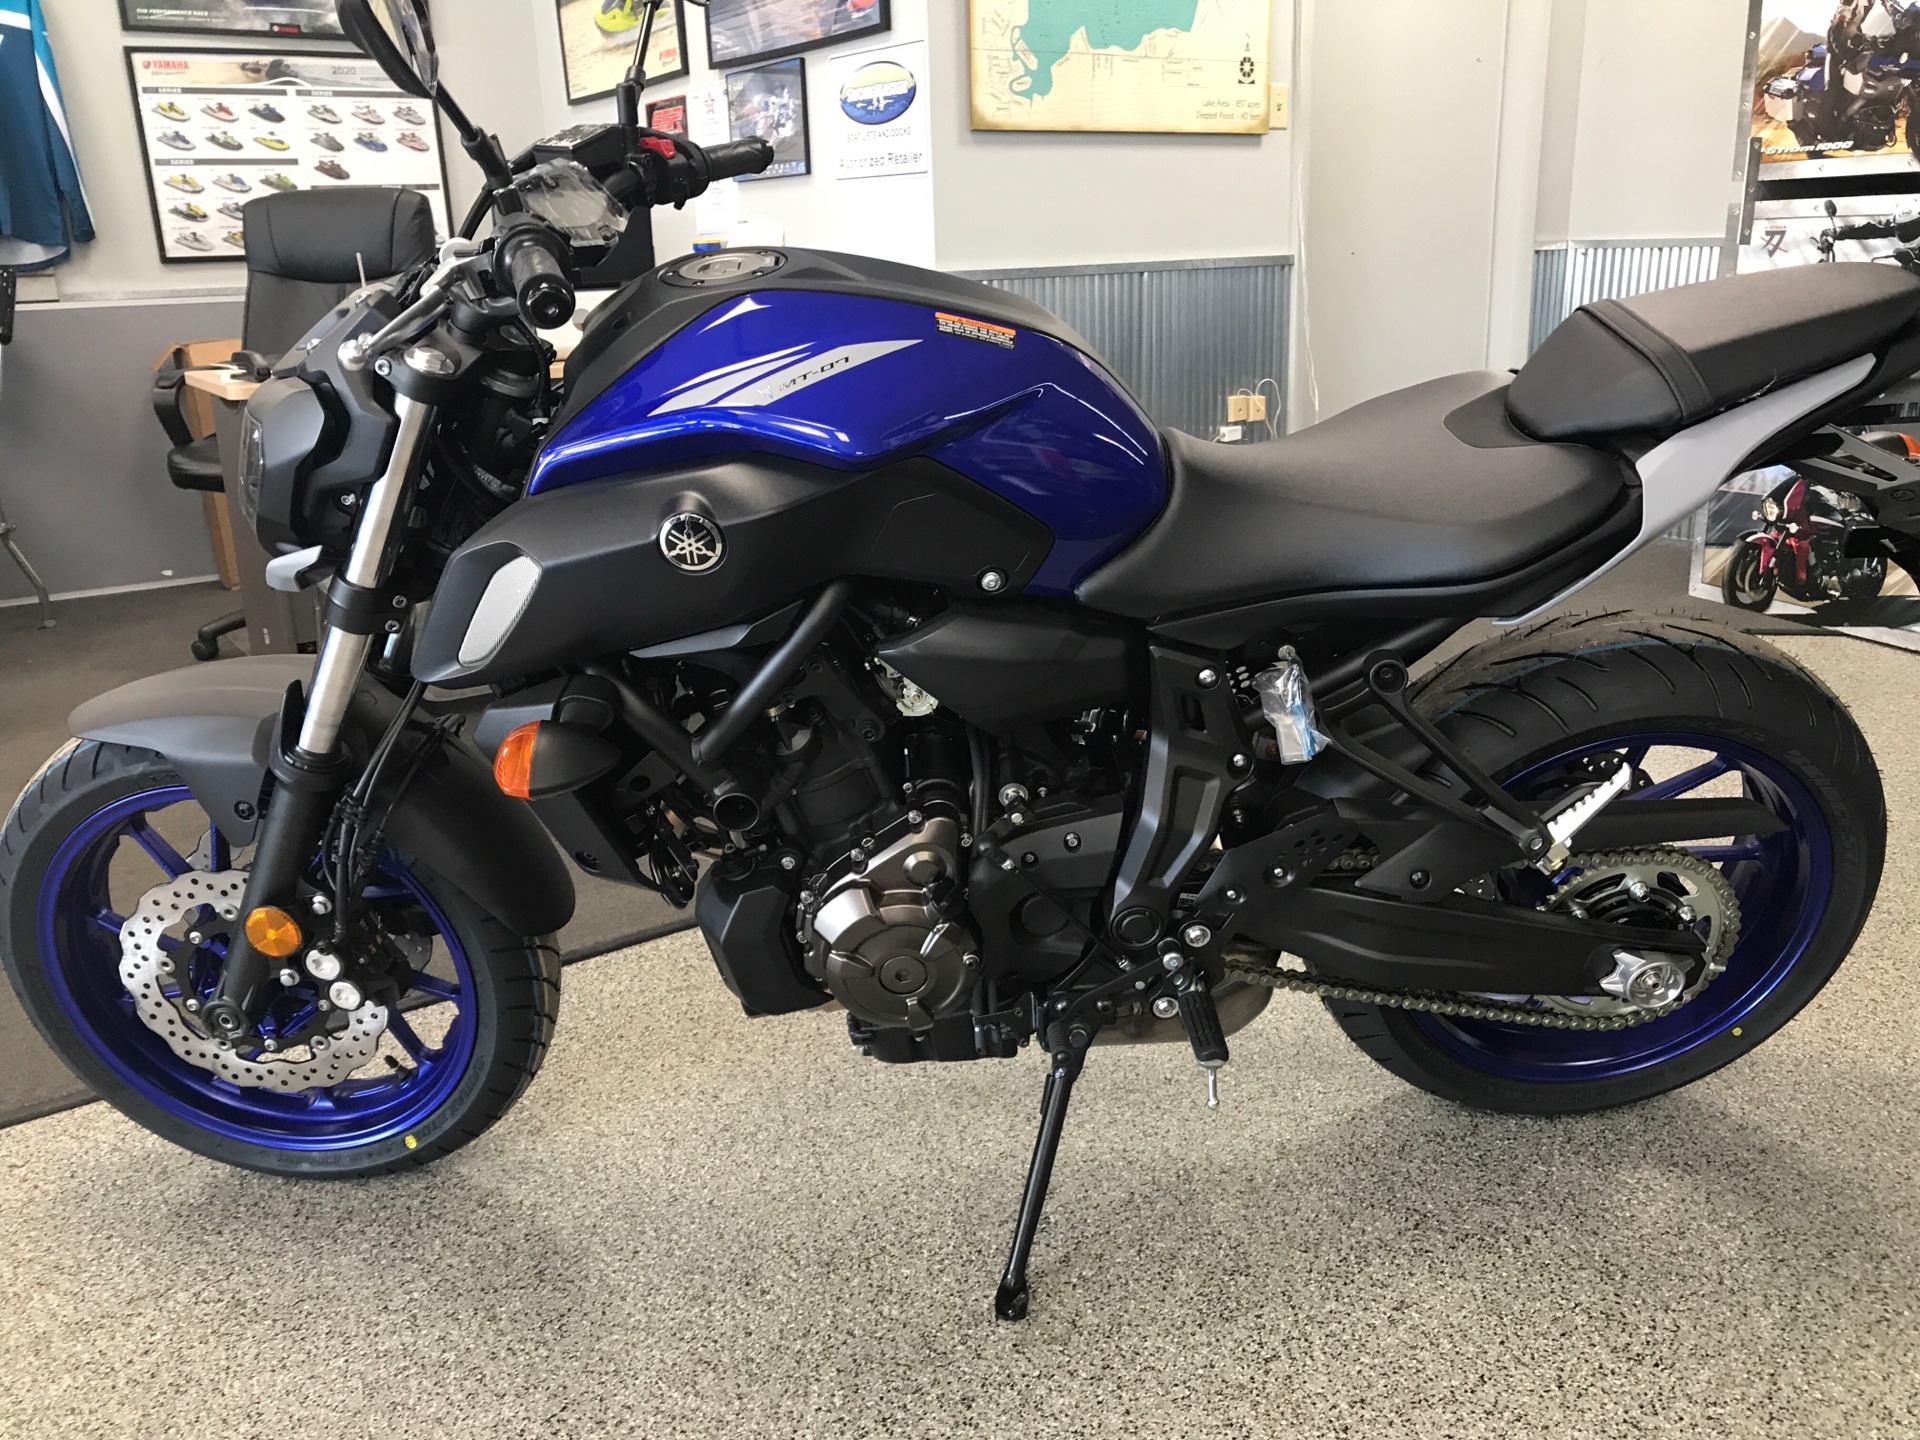 New 2020 Yamaha Mt 07 Motorcycles In Coloma Mi Stock Number 005903